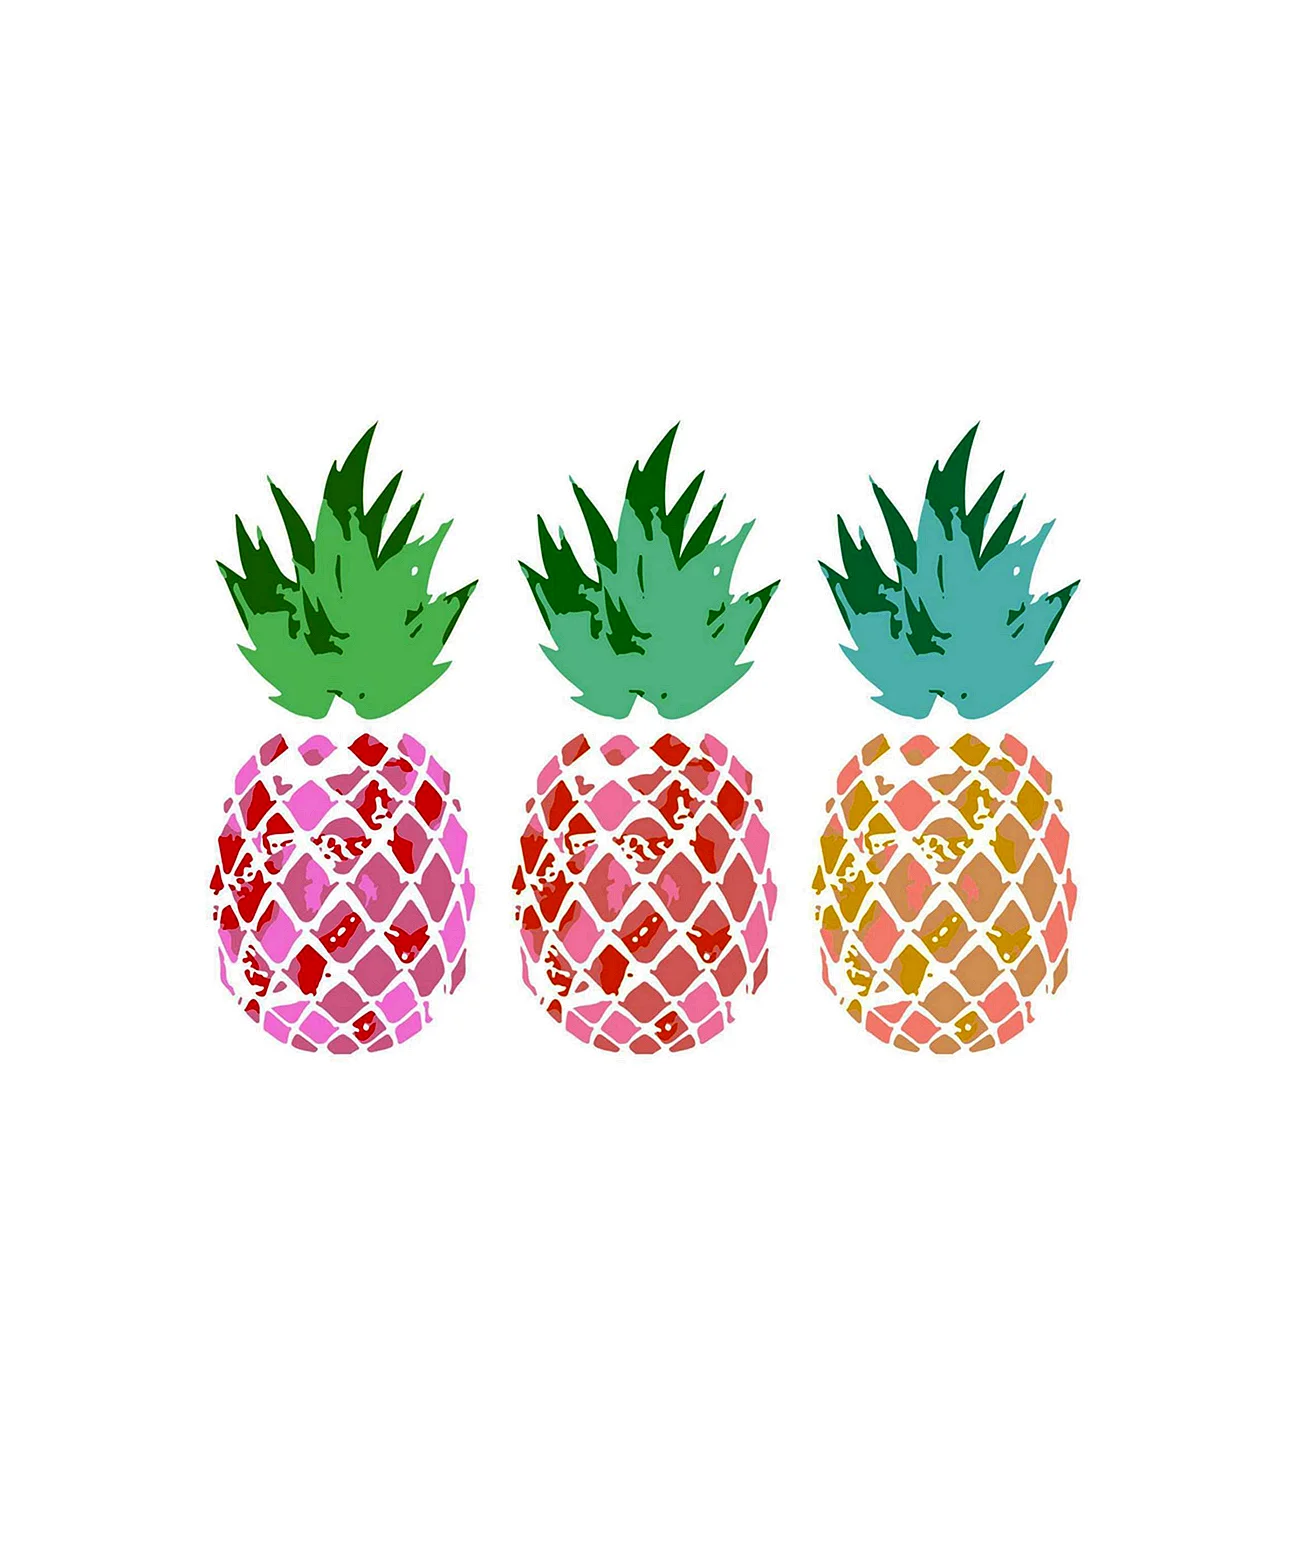 Cute Pineapple Wallpaper For iPhone